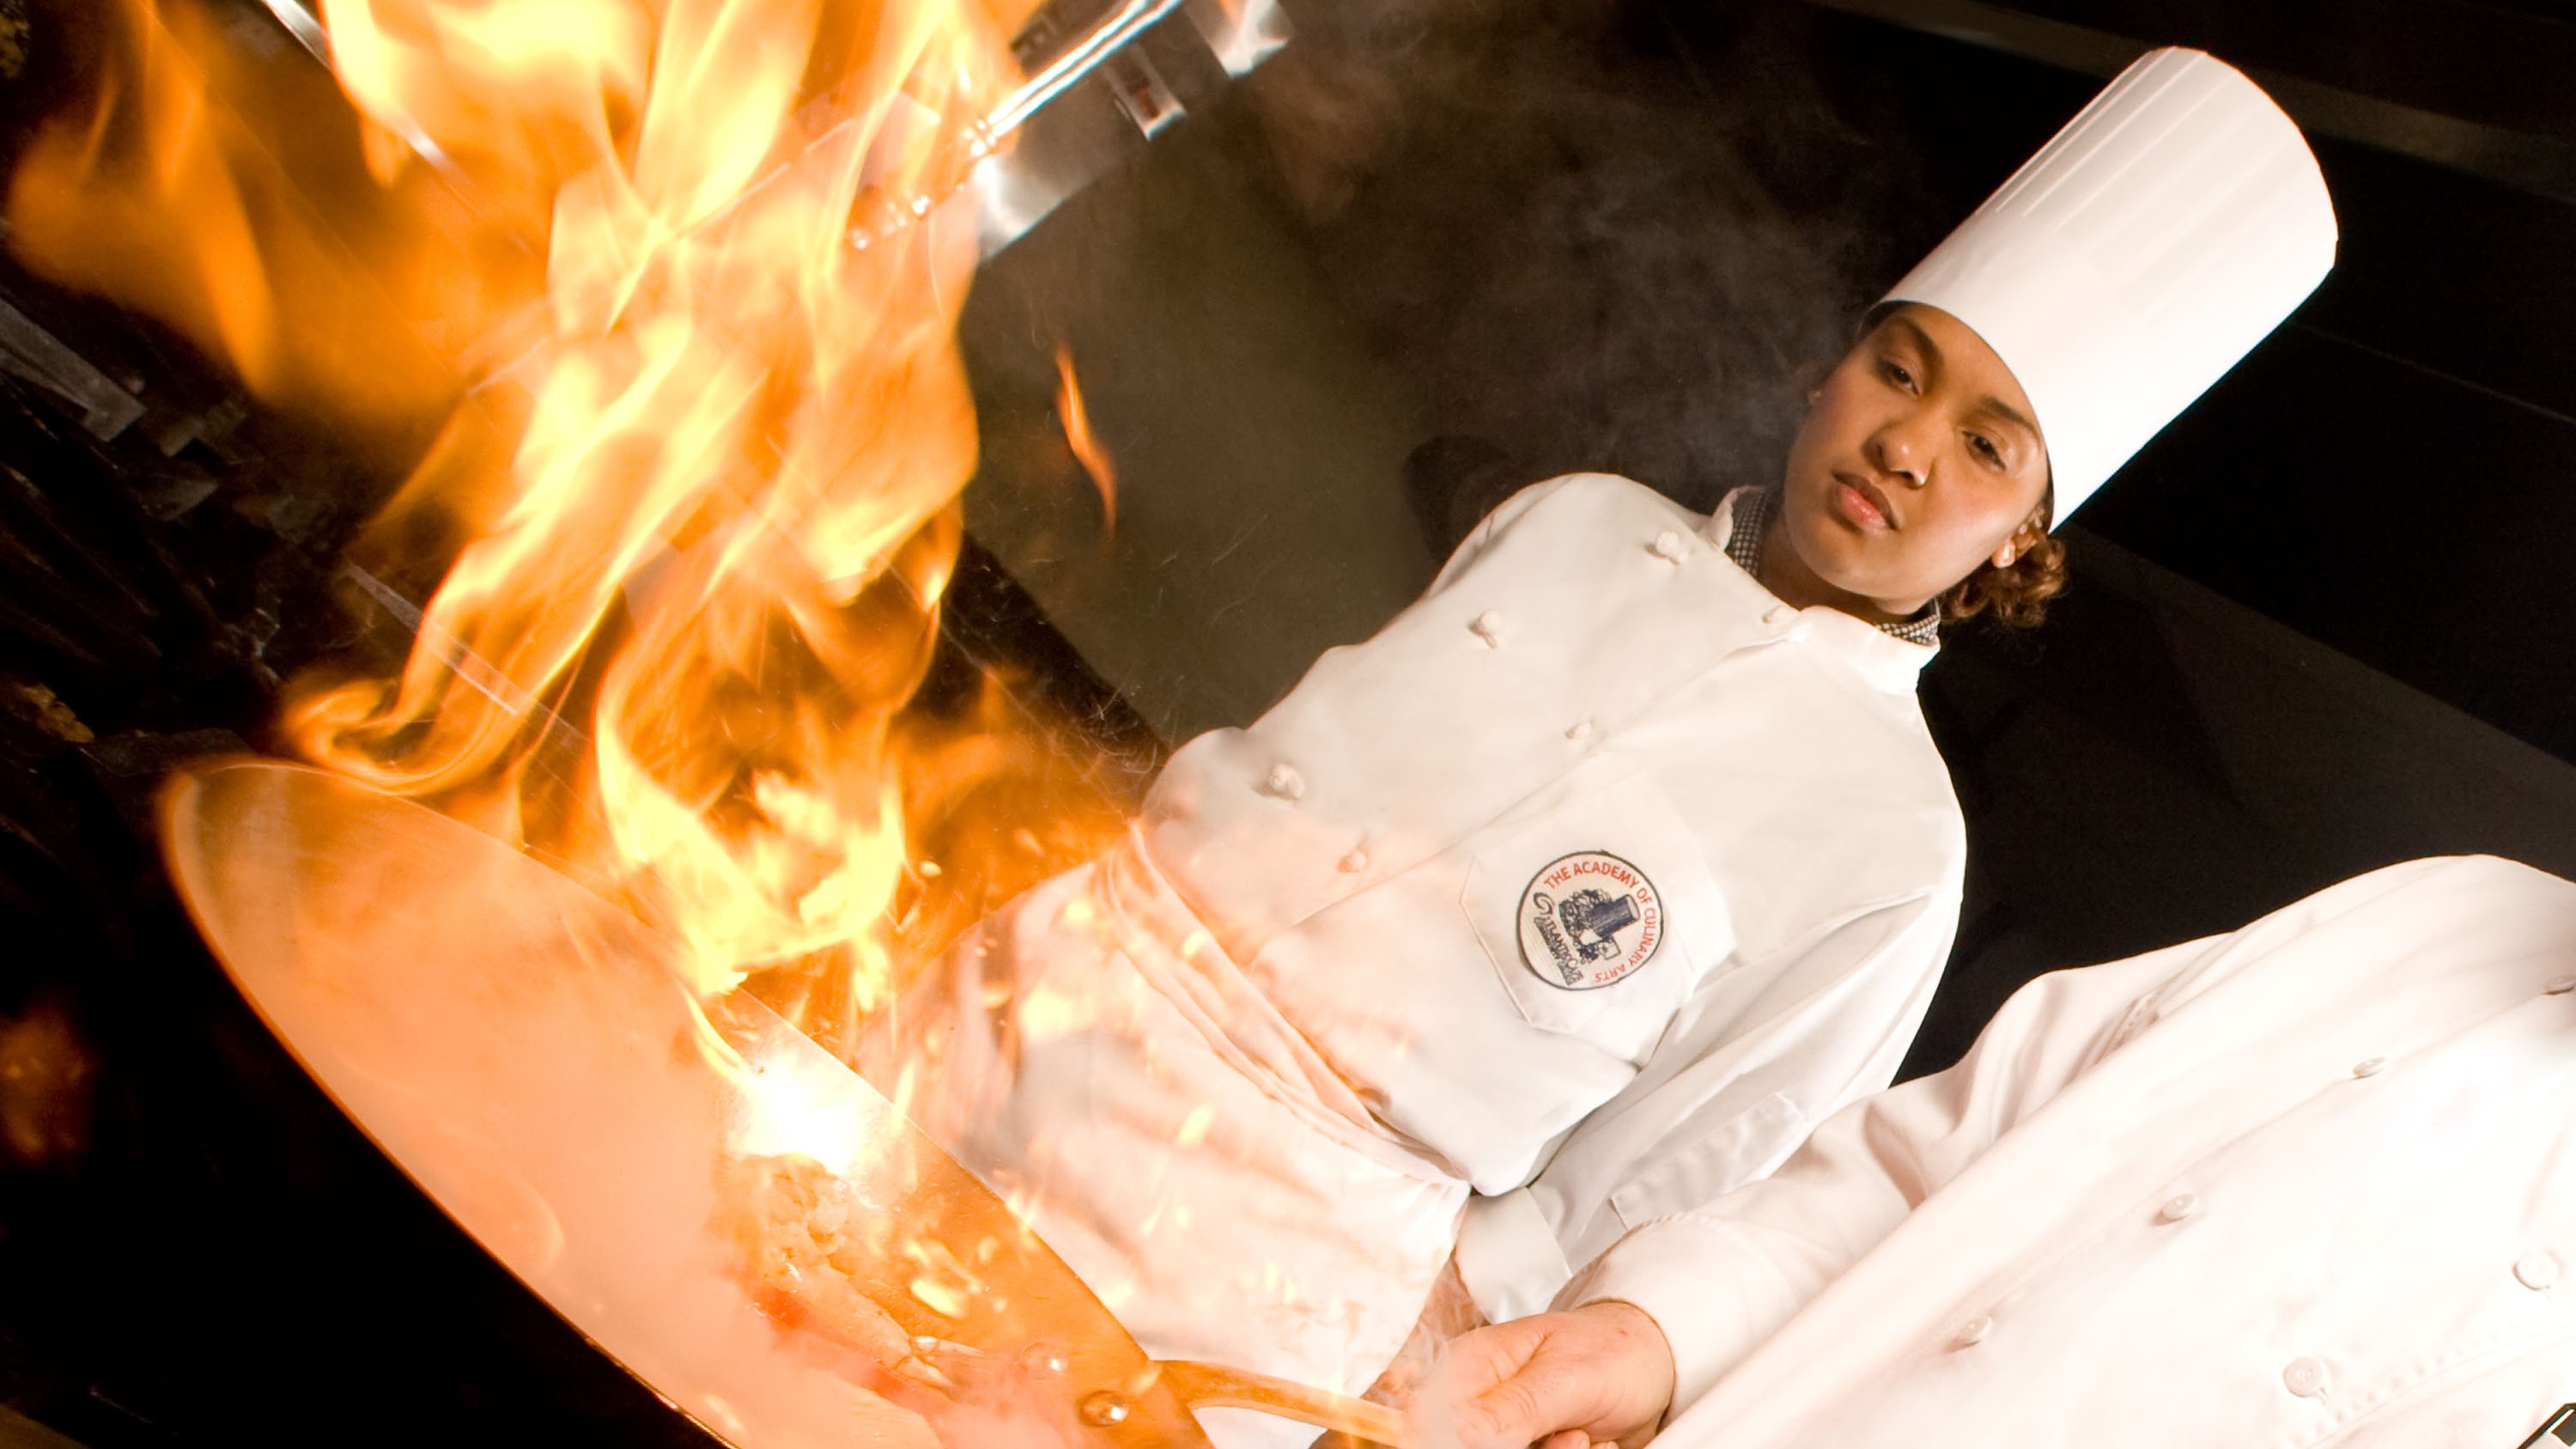 Chef cooking with frying pan as flames ascend